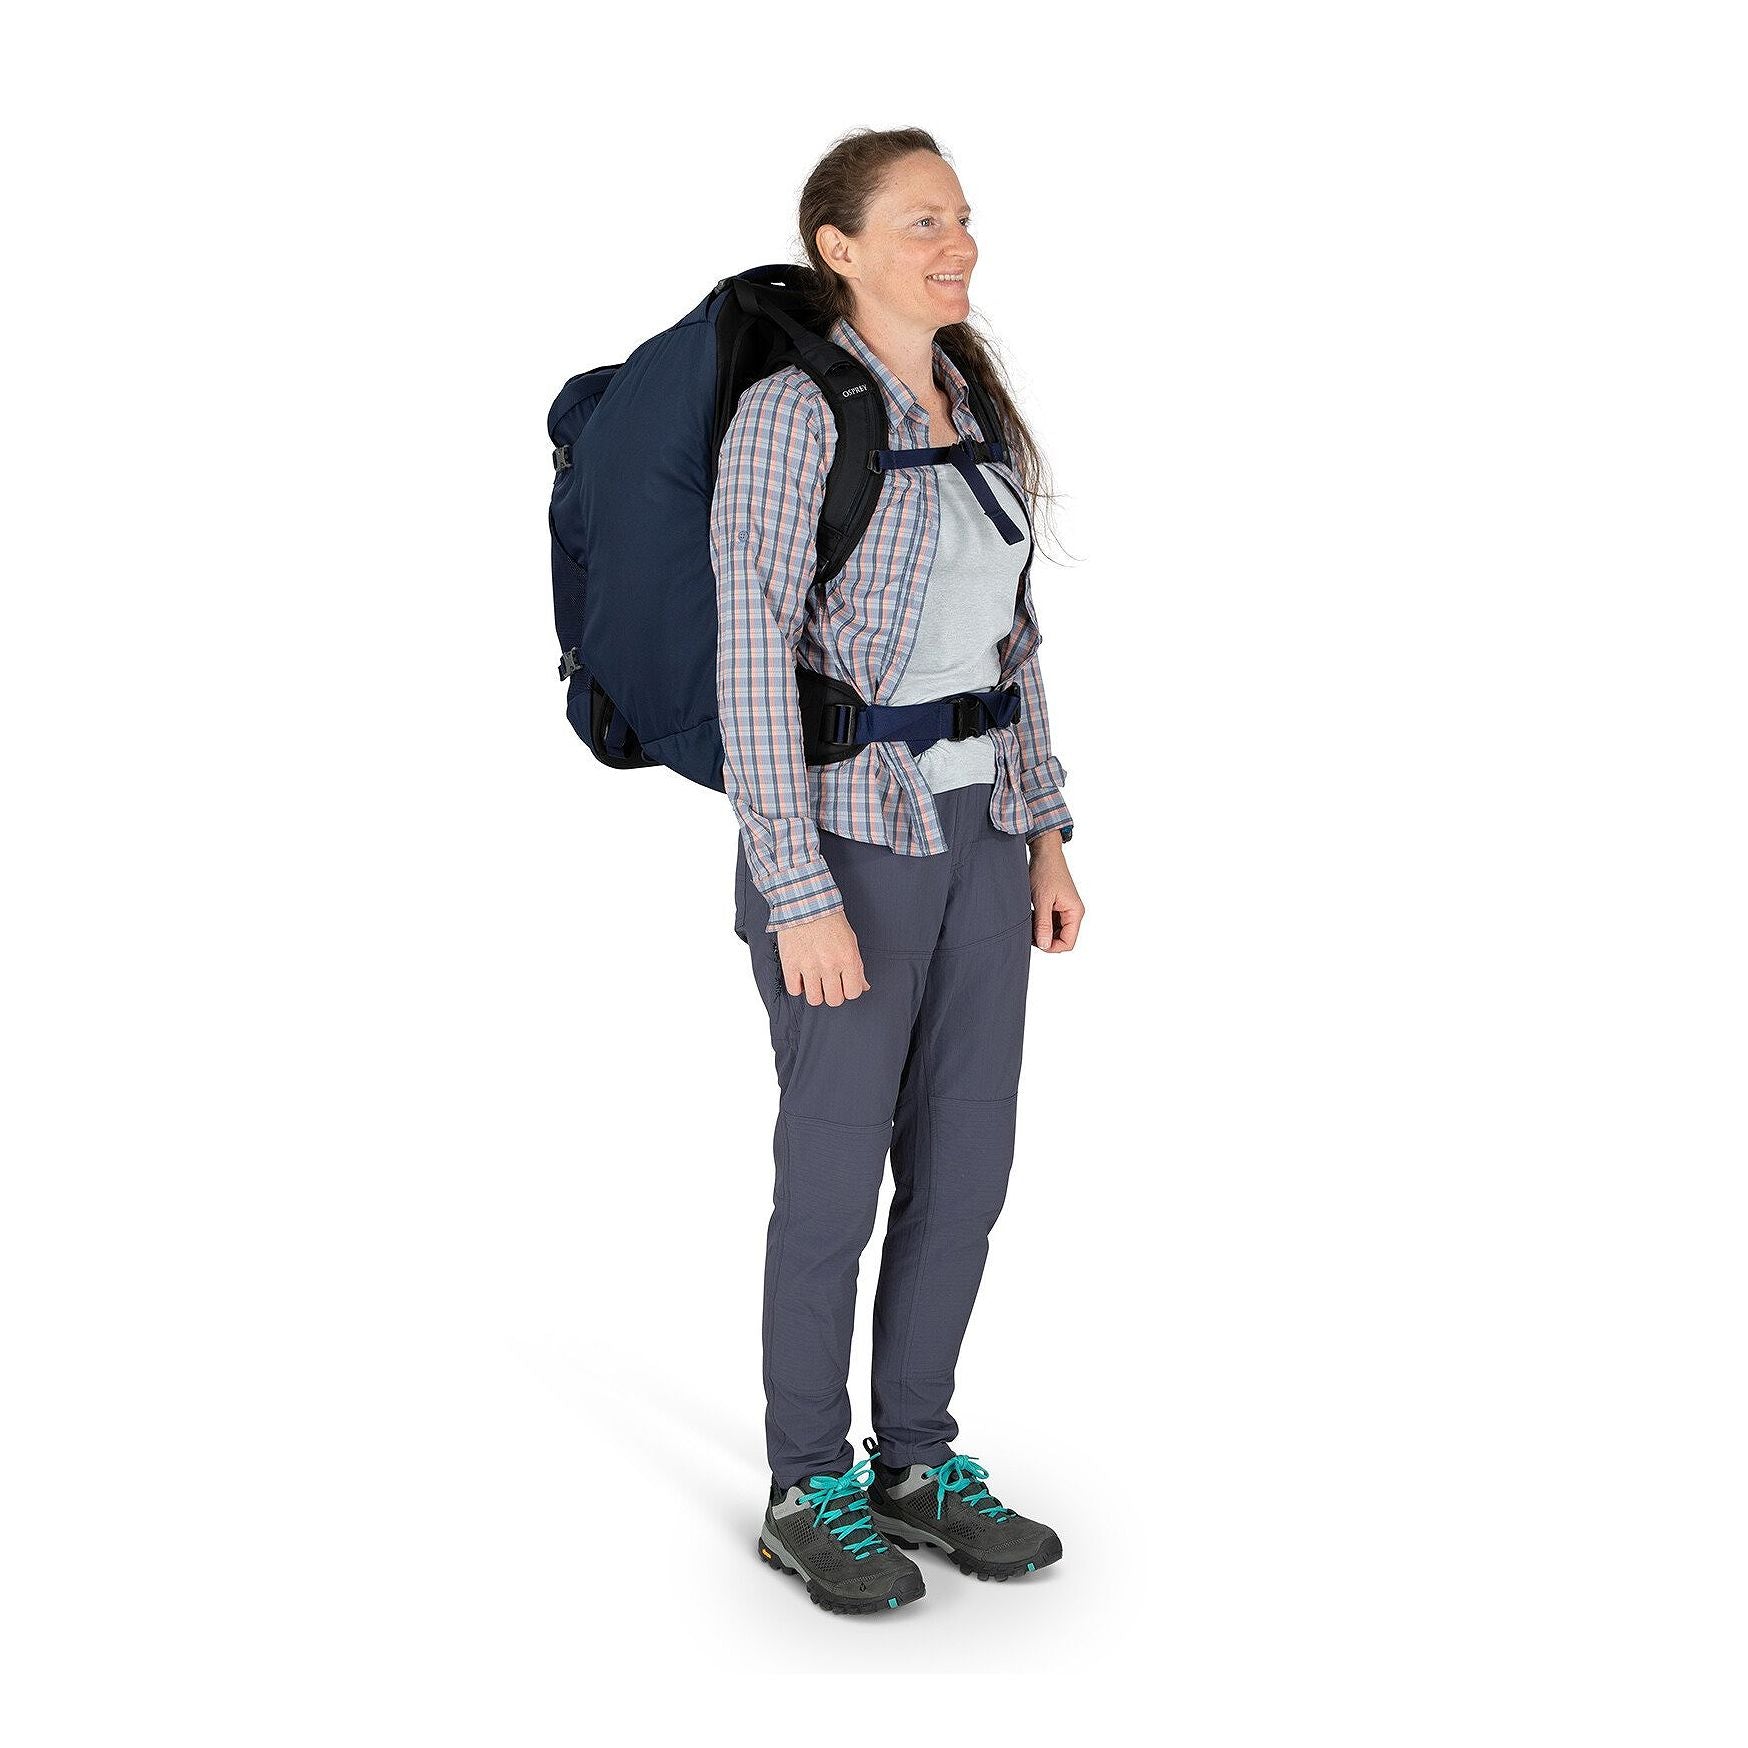 Osprey Fairview Womens Backpack - 55 Litres